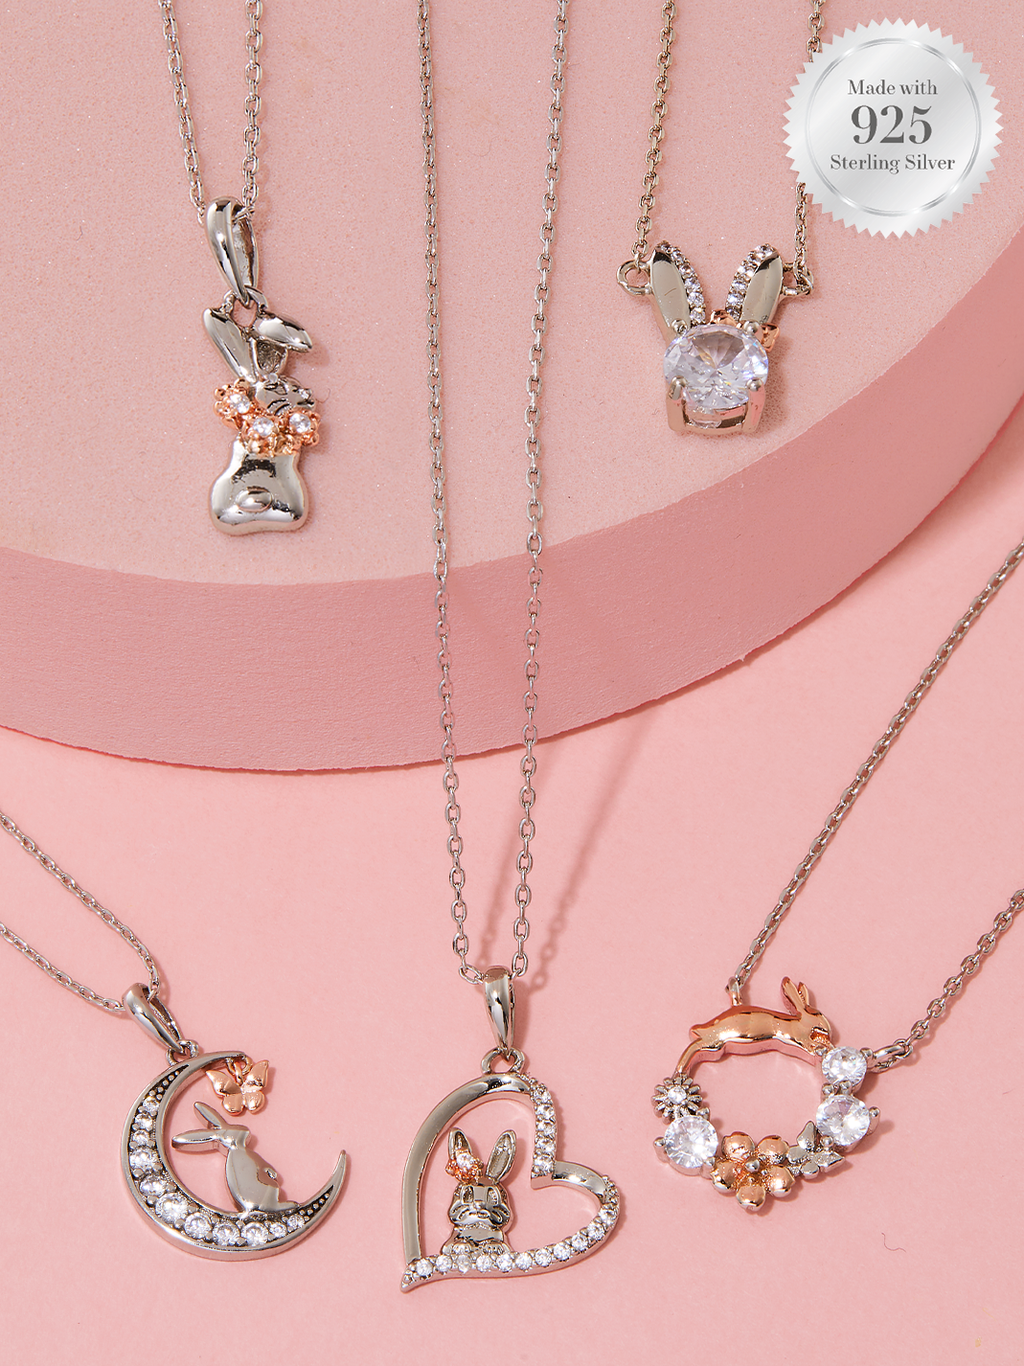 Bunny Love Candle - 925 Sterling Silver Bunny Necklace Collection